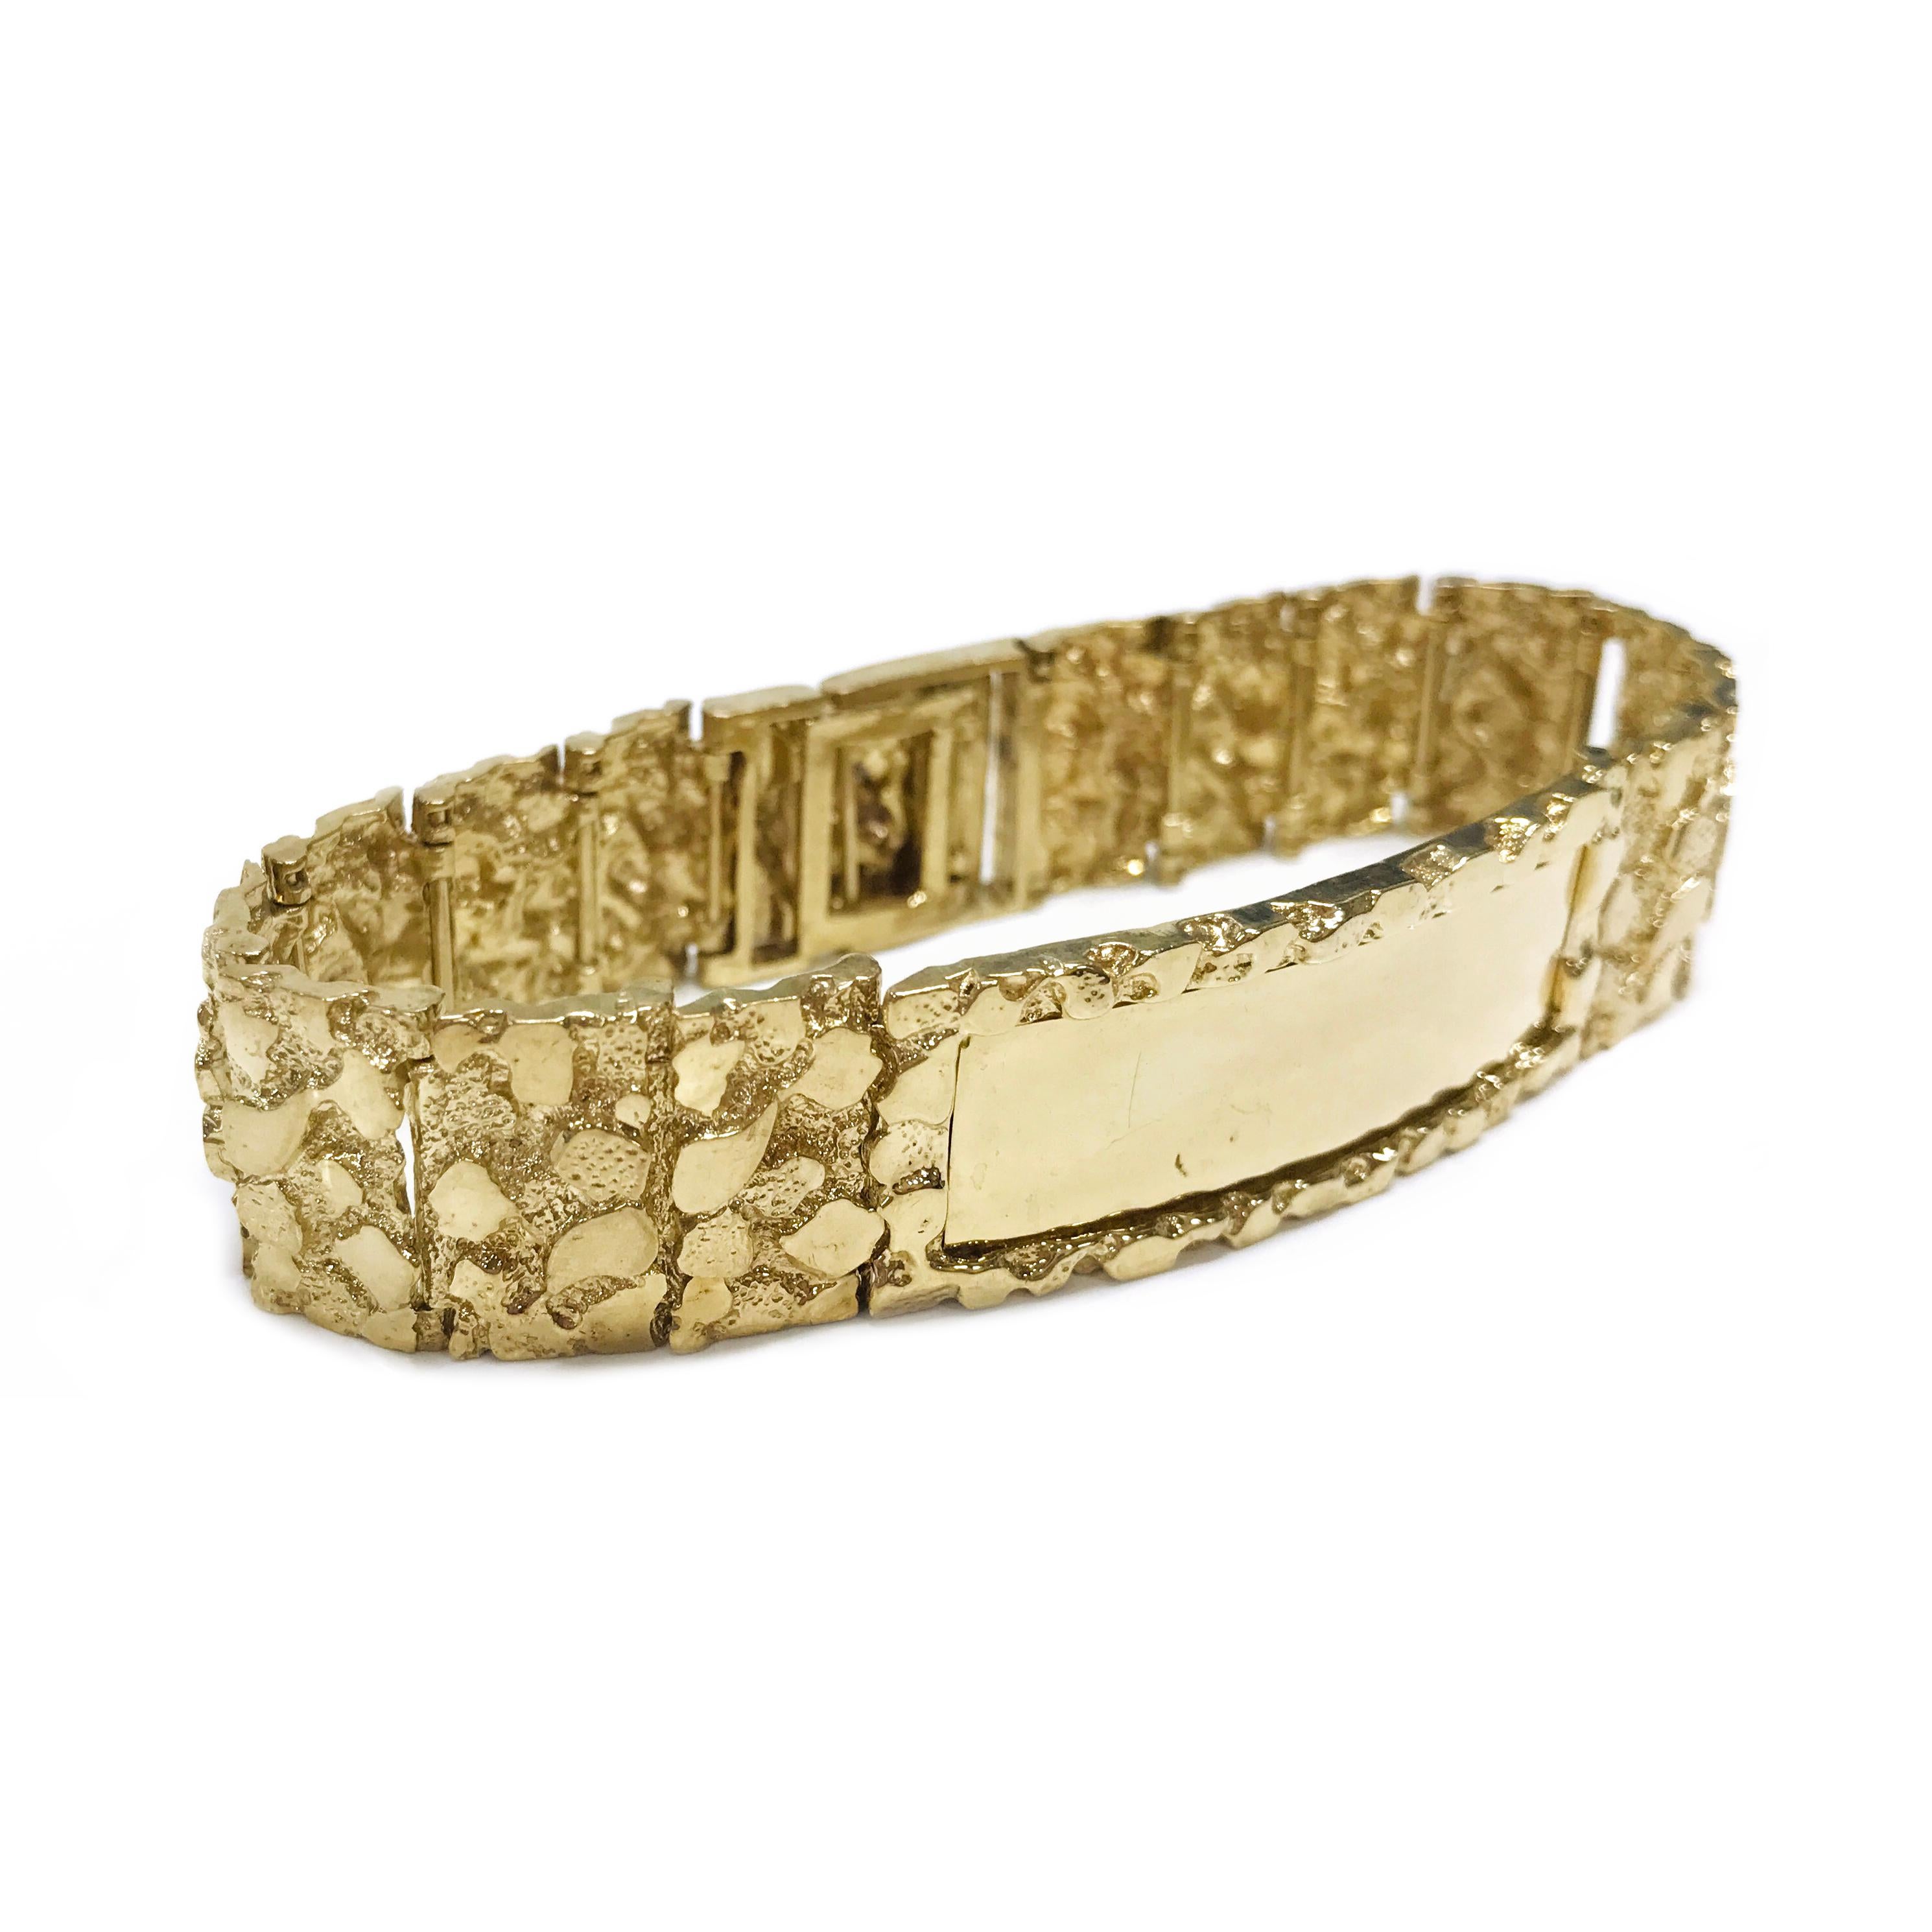 14 Karat Gold Nugget ID Bracelet. The bracelet features fourteen nugget textured links with a rectangular ID link center. The center smooth area is engravable. Stamped on the inside of the clasp is 14K. The bracelet is 8.5